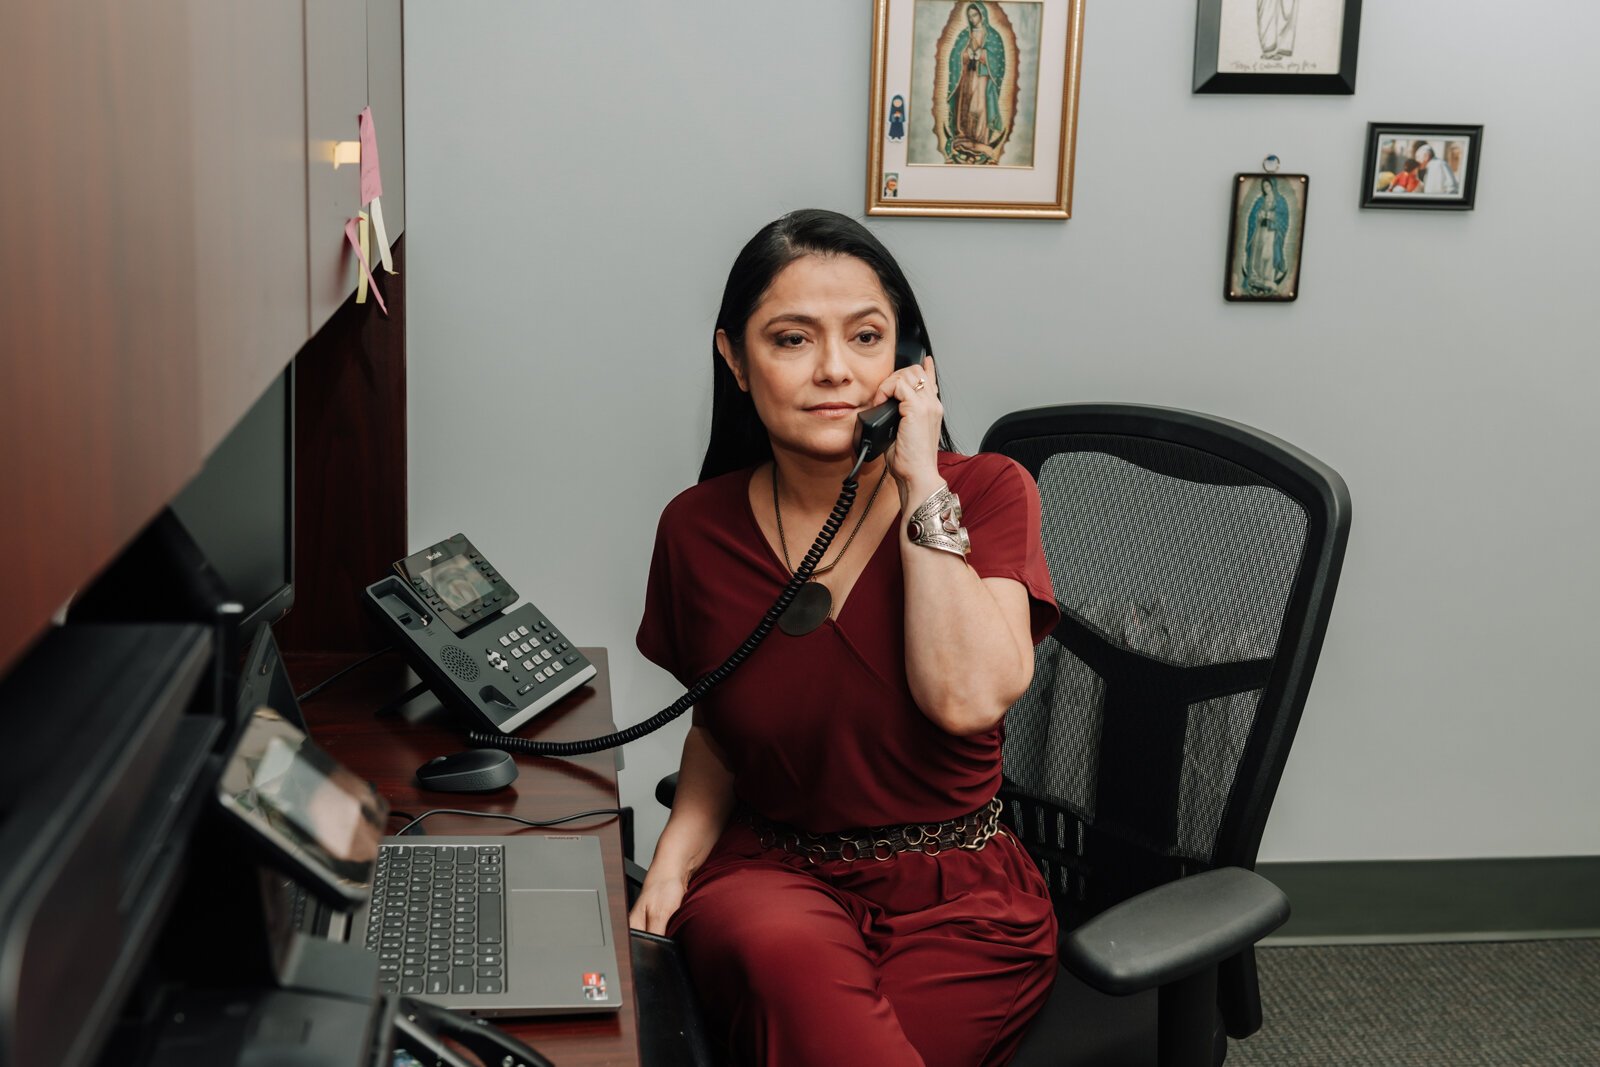 Luz Ostrognai with Catholic Charities works in her office at the Archbishop Noll Catholic Center.